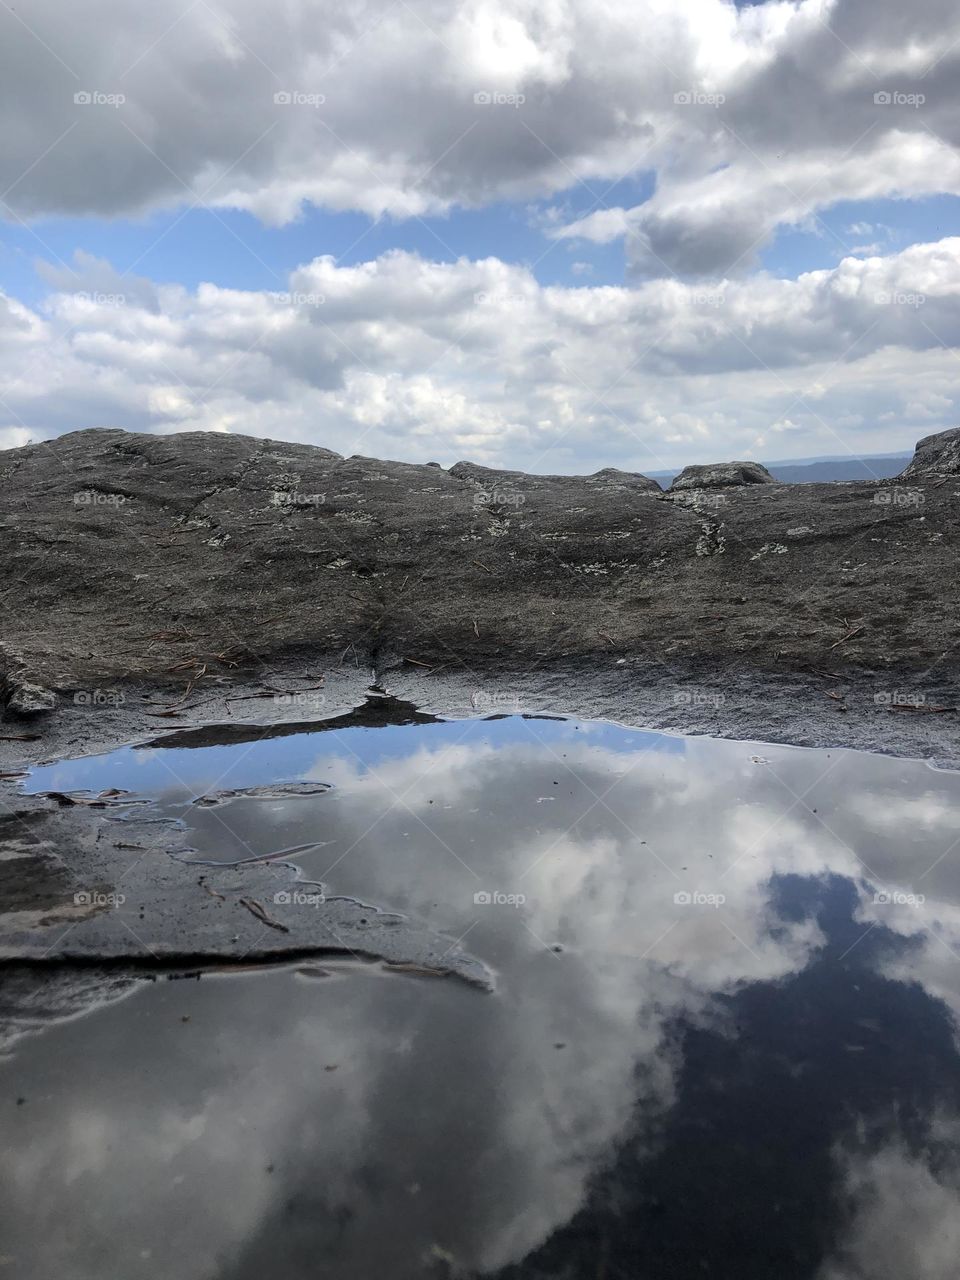 Rain puddle reflecting the sky. On the edge of a cliff it looks like a mountain and lake